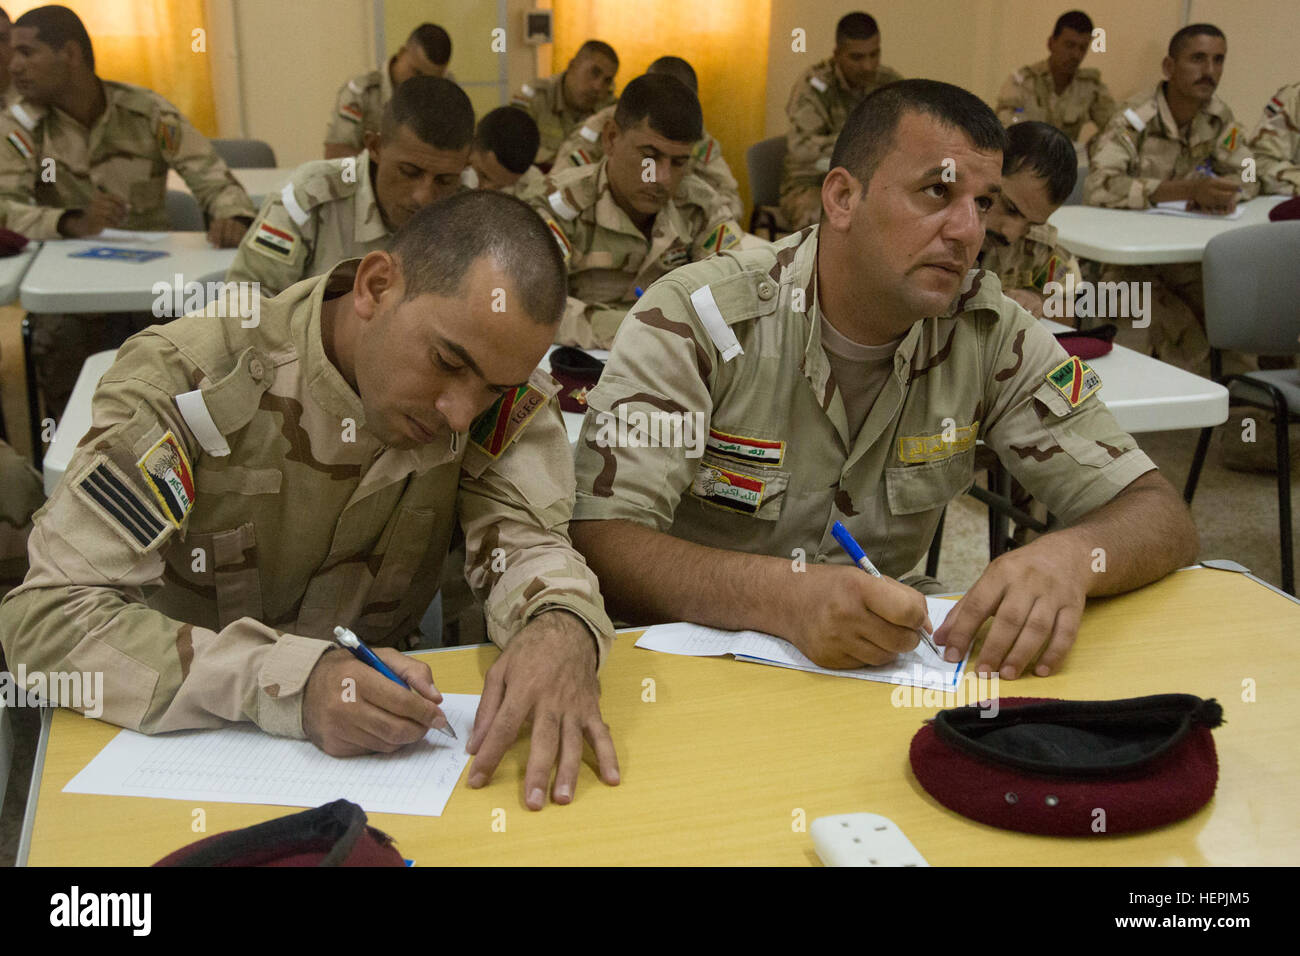 Iraqi soldiers attending the noncommissioned officer academy take a map reading test at Camp Taji, Iraq, Aug. 23, 2015. Task Group Taji spearheaded the academy concept in order to teach Iraqi NCOs how to train and care for their soldiers in different situations. Through professional development with the Iraqi NCOs, Combined Joint Task Force – Operation Inherent Resolve is empowering the Iraqi security forces in the fight against the Islamic State of Iraq and the Levant. (U.S. Army photo by Spc. Paris Maxey/Released) Iraqis attend NCO academy 150823-A-XM842-052 Stock Photo